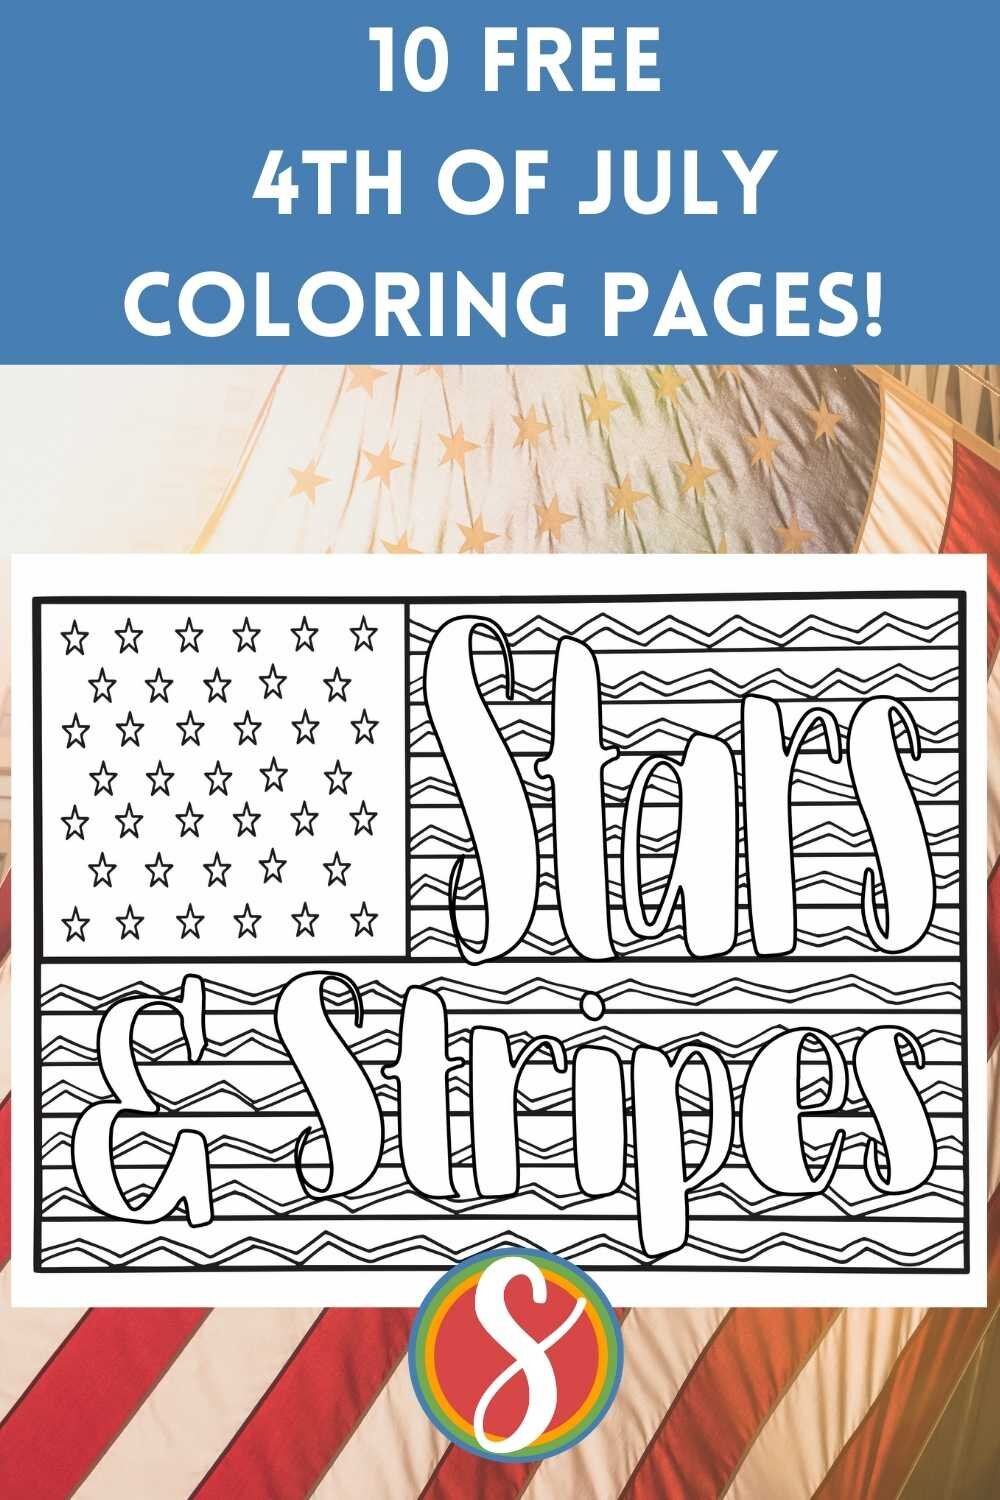 4th of July coloring pages with american flag, text reads "stars & stripes"